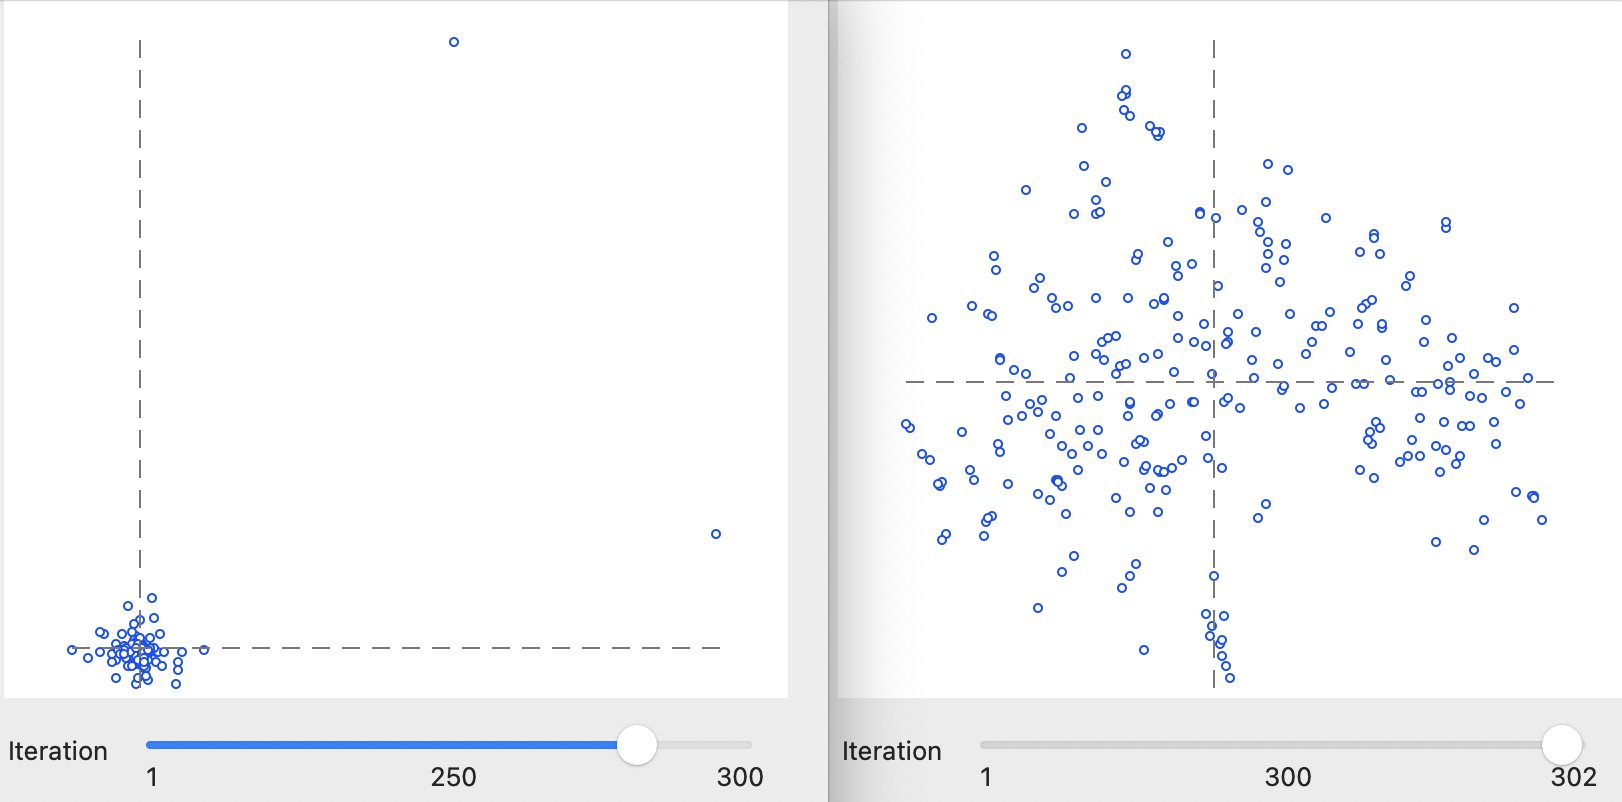 Inspecting interations of t-SNE algorithm: 250 and 300